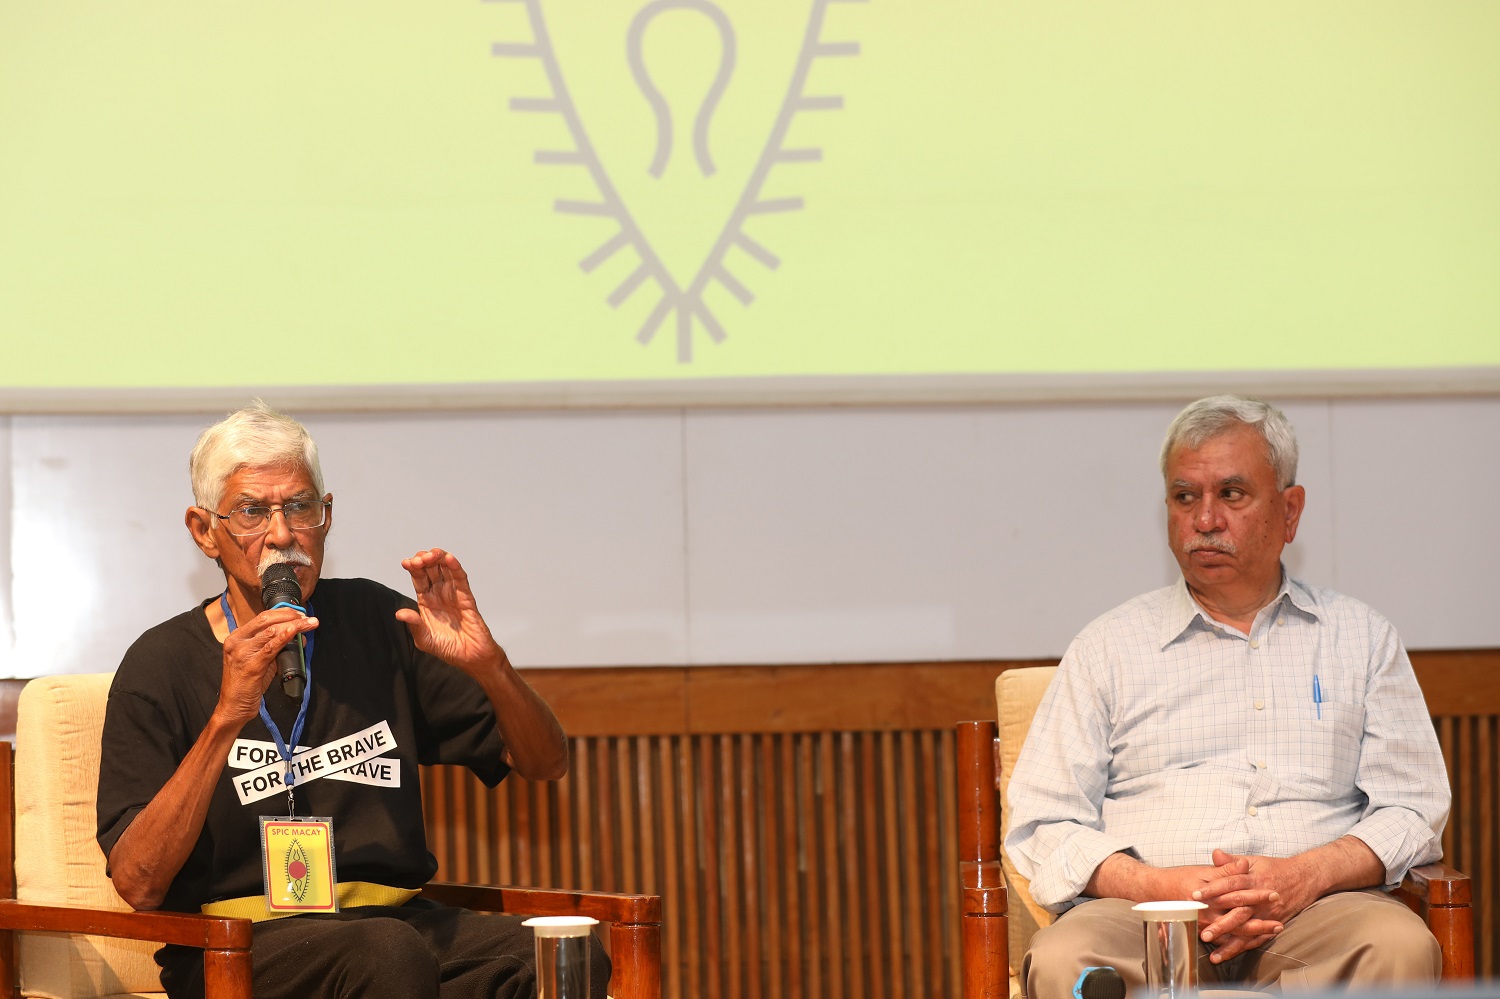 Dr. Kiran Seth, Padma Shree awardee and Professor Emeritus of IIT Delhi, delivered a guest lecture session at IIMB on 2 January 2023.